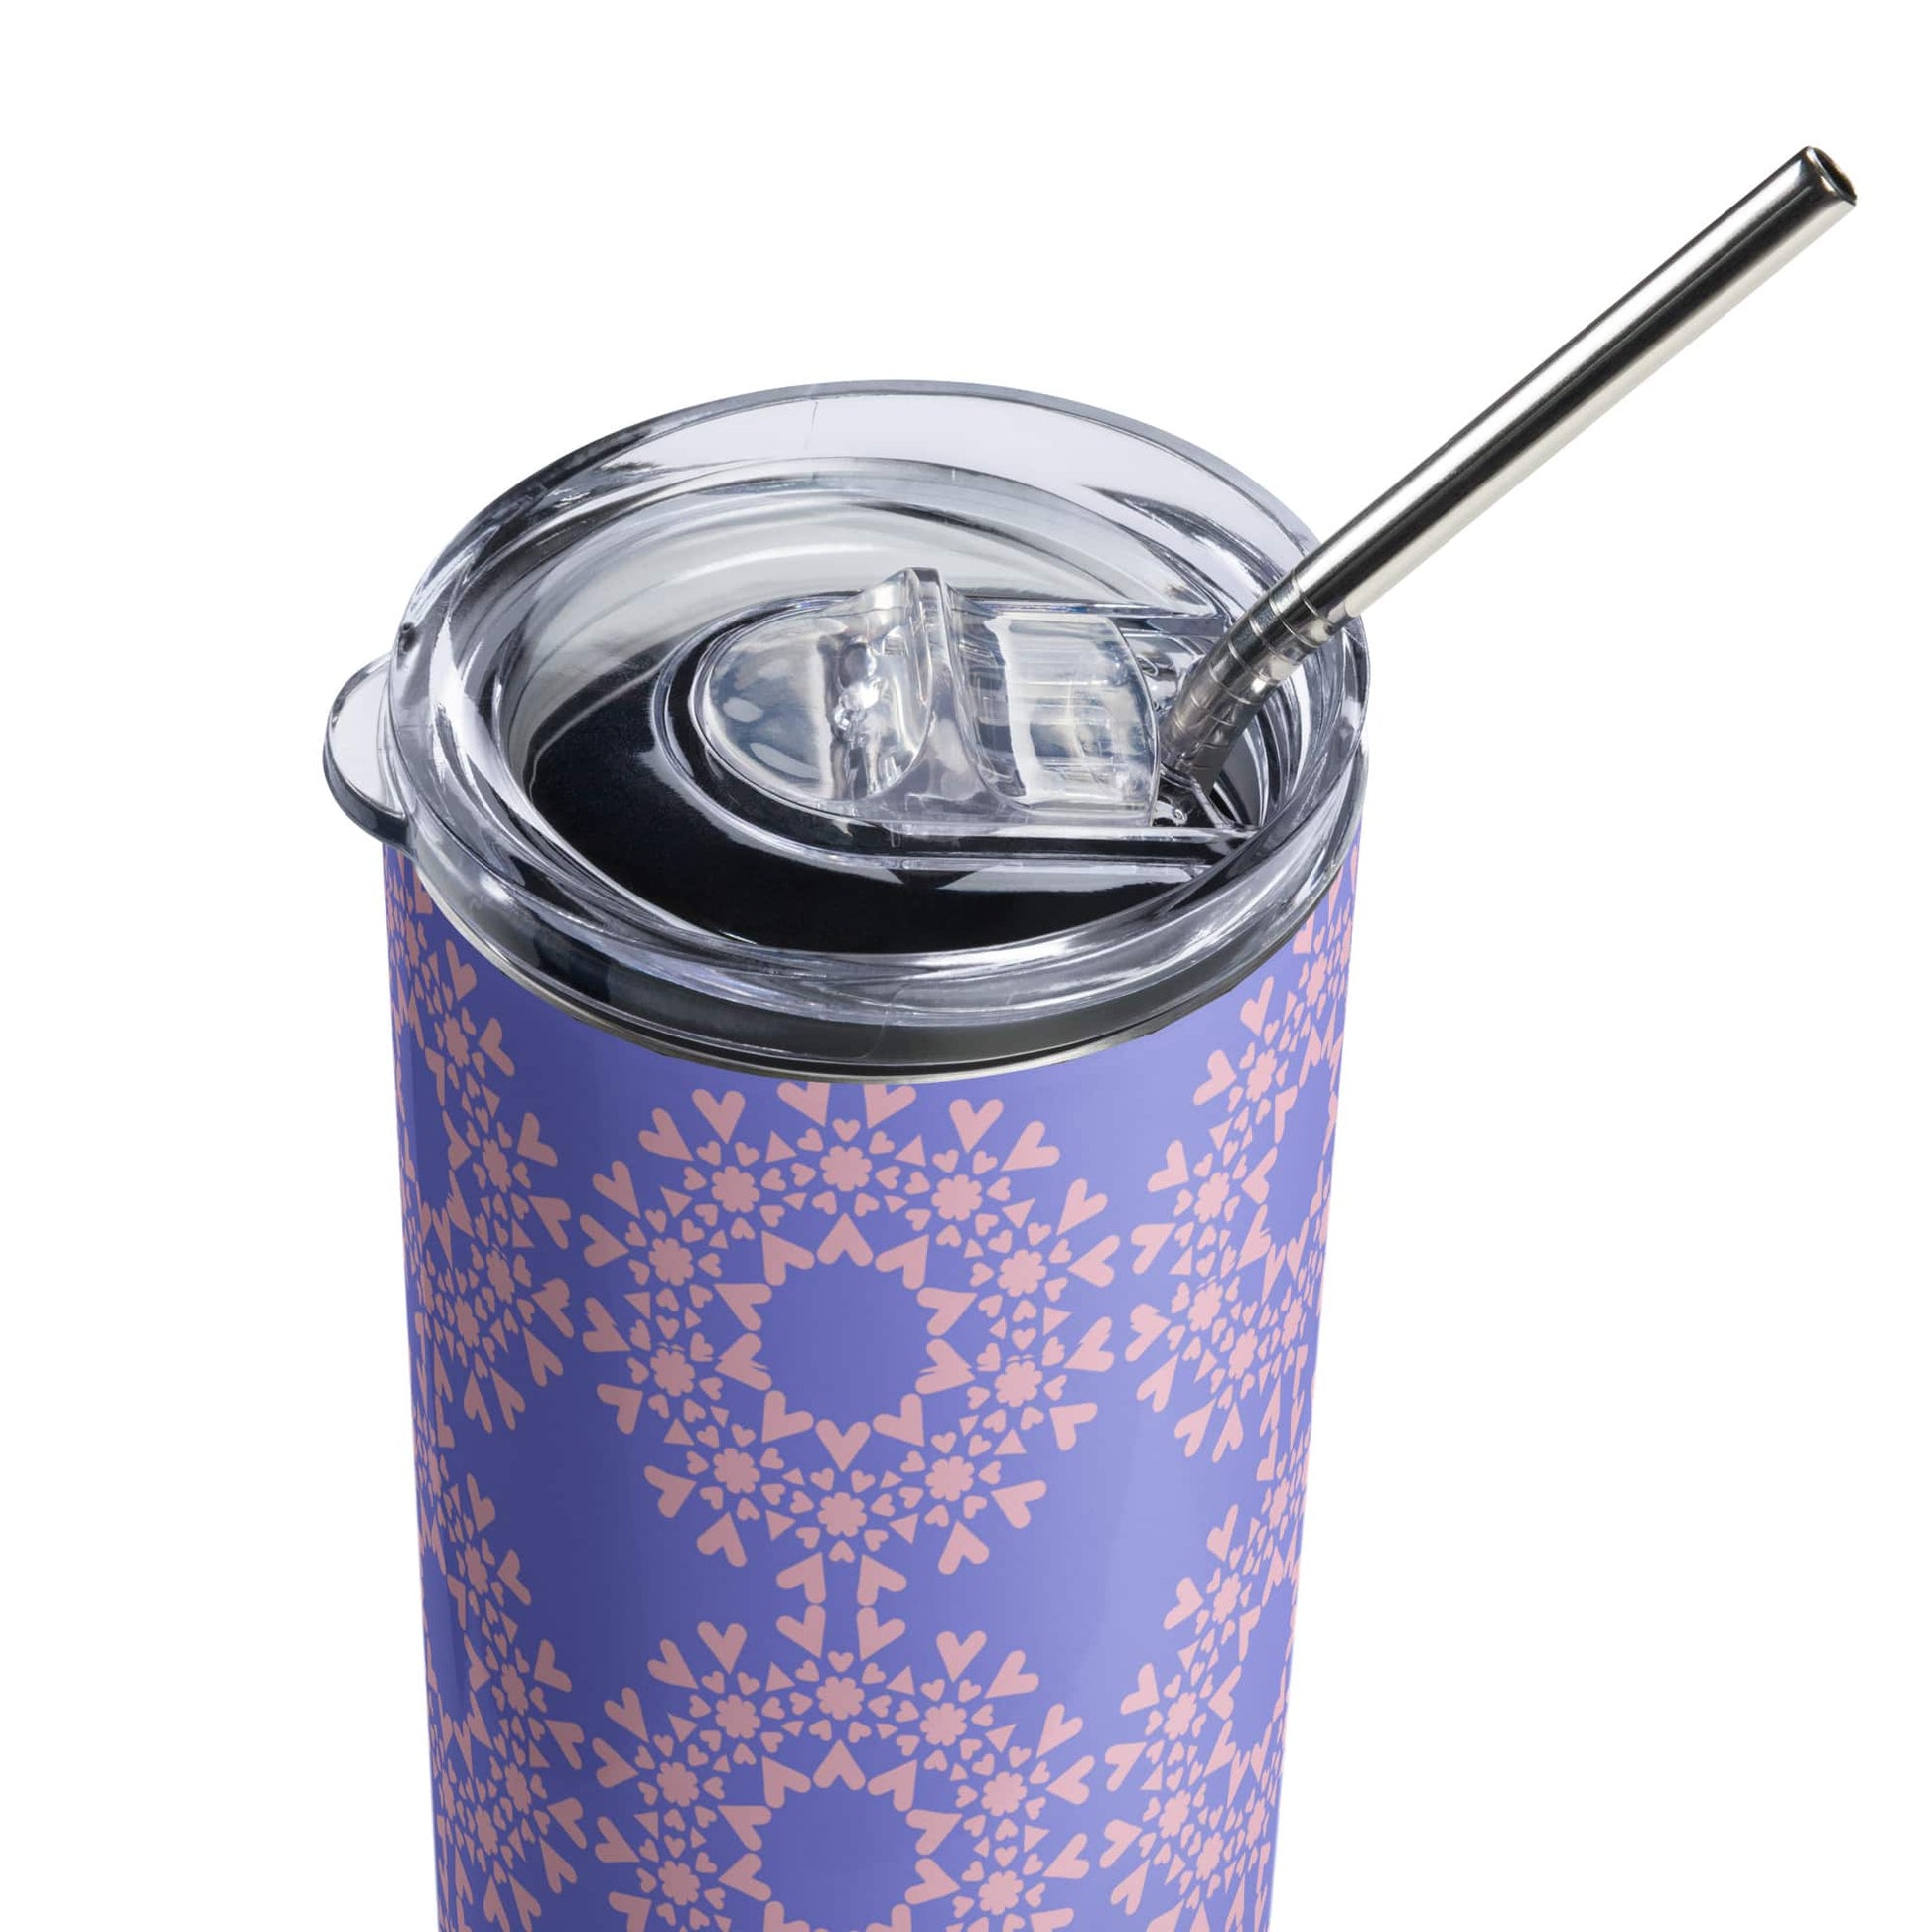 20 oz Tumbler with a Stainless Steel Straw